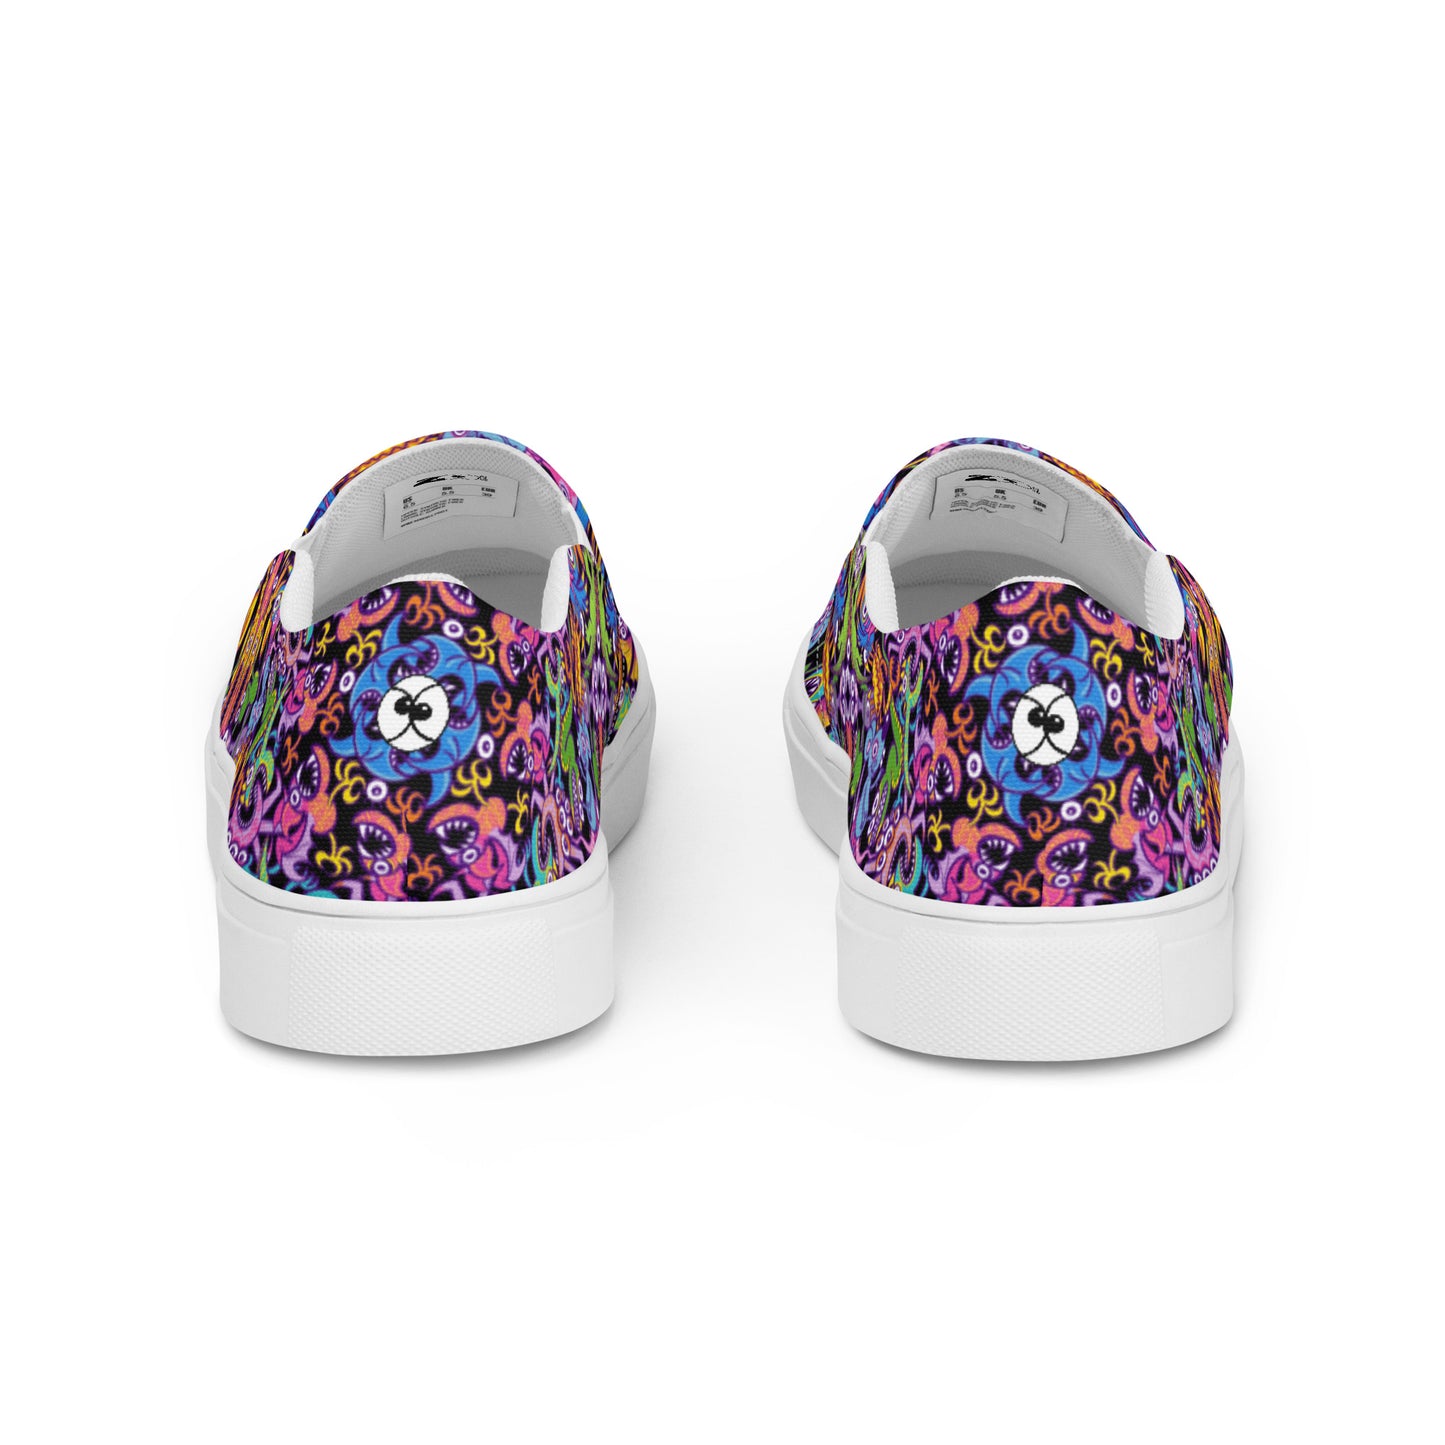 Eccentric critters in a lively crazy festival Men’s slip-on canvas shoes. Back view